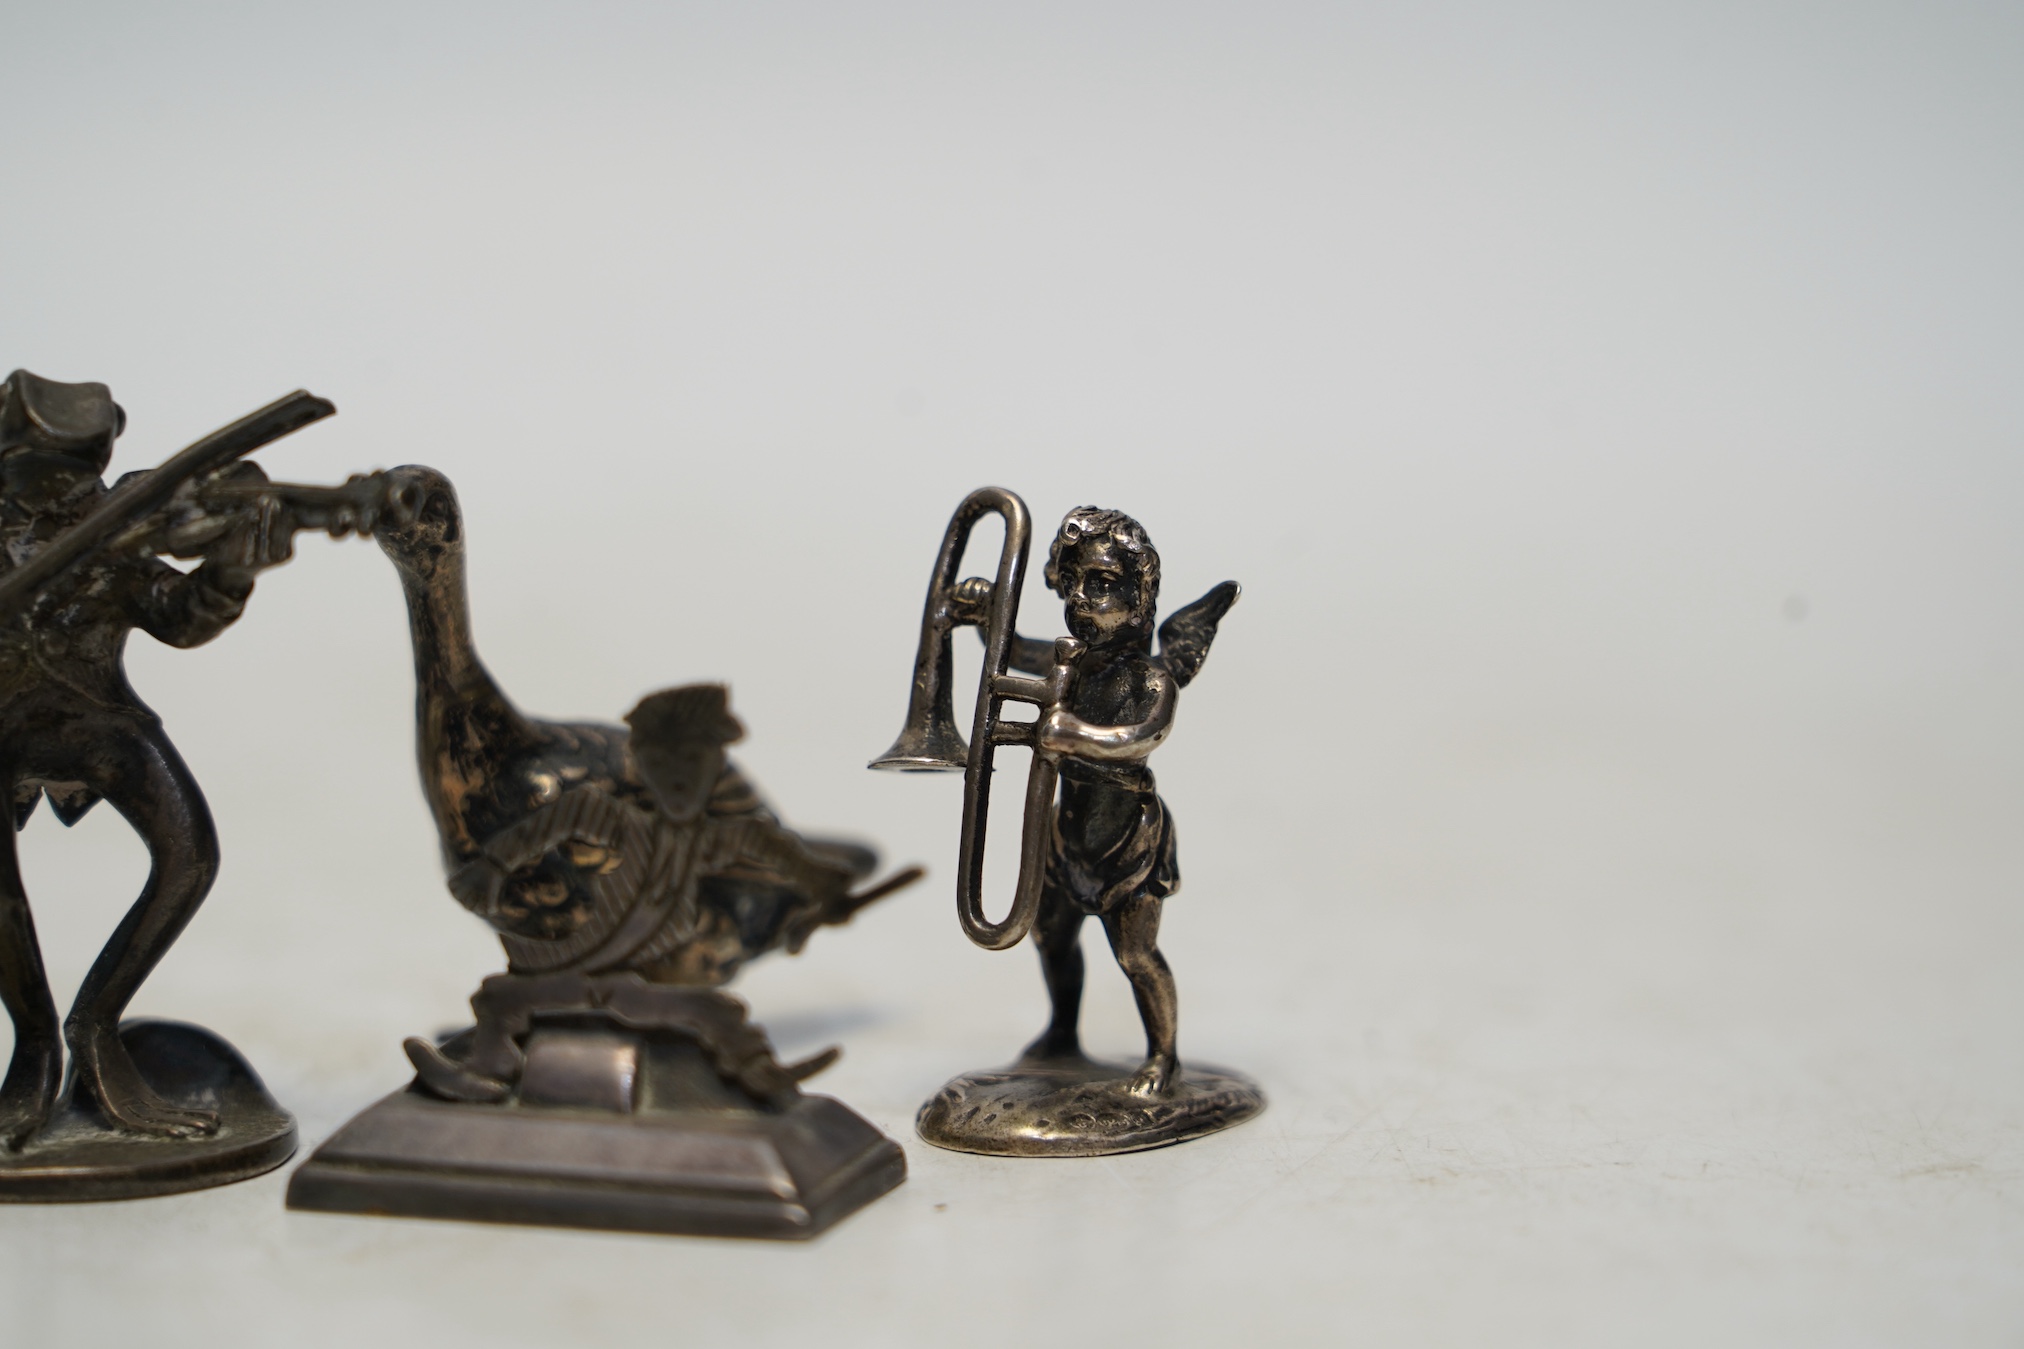 Two early 20th century miniature silver models of a goose and a cherub with trombone, 37mm, an 800 standard figural menu holder and a later silver model of a frog with violin. Condition - fair